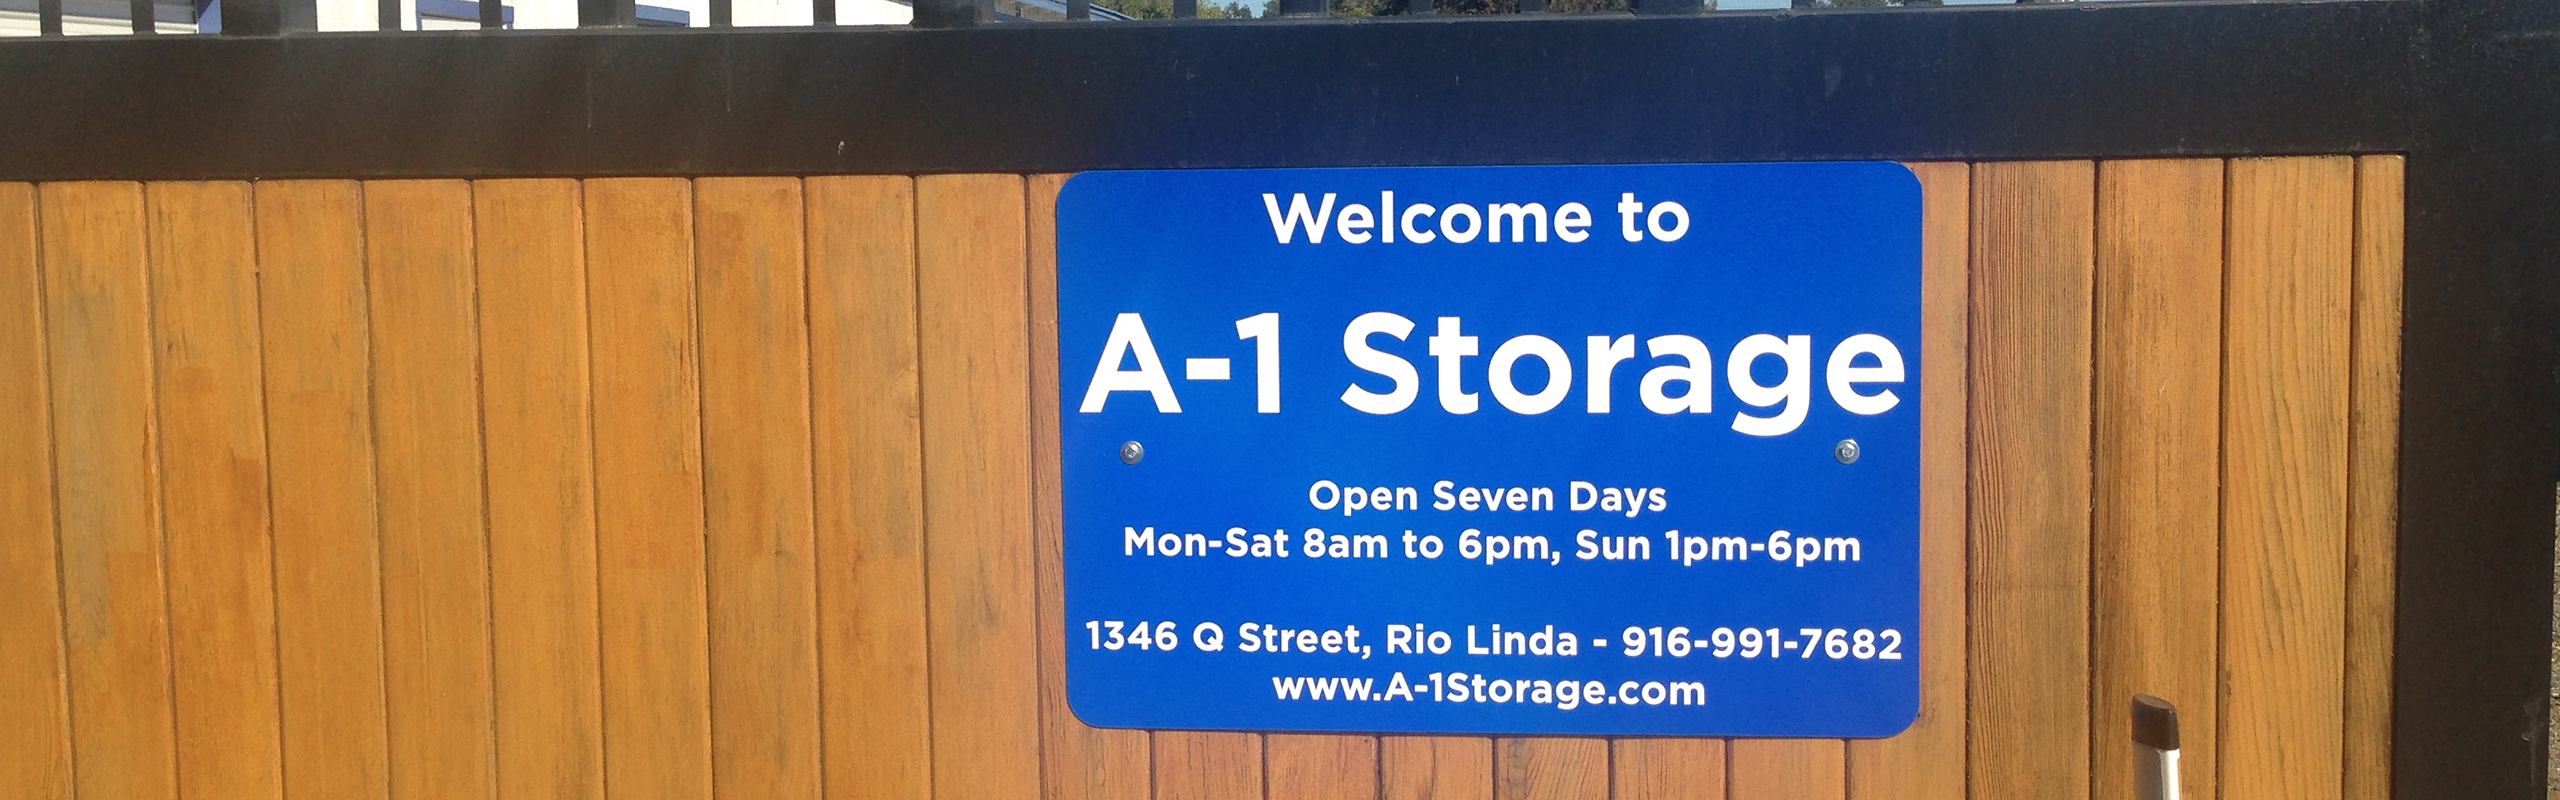 Welcome to A-1 Storage